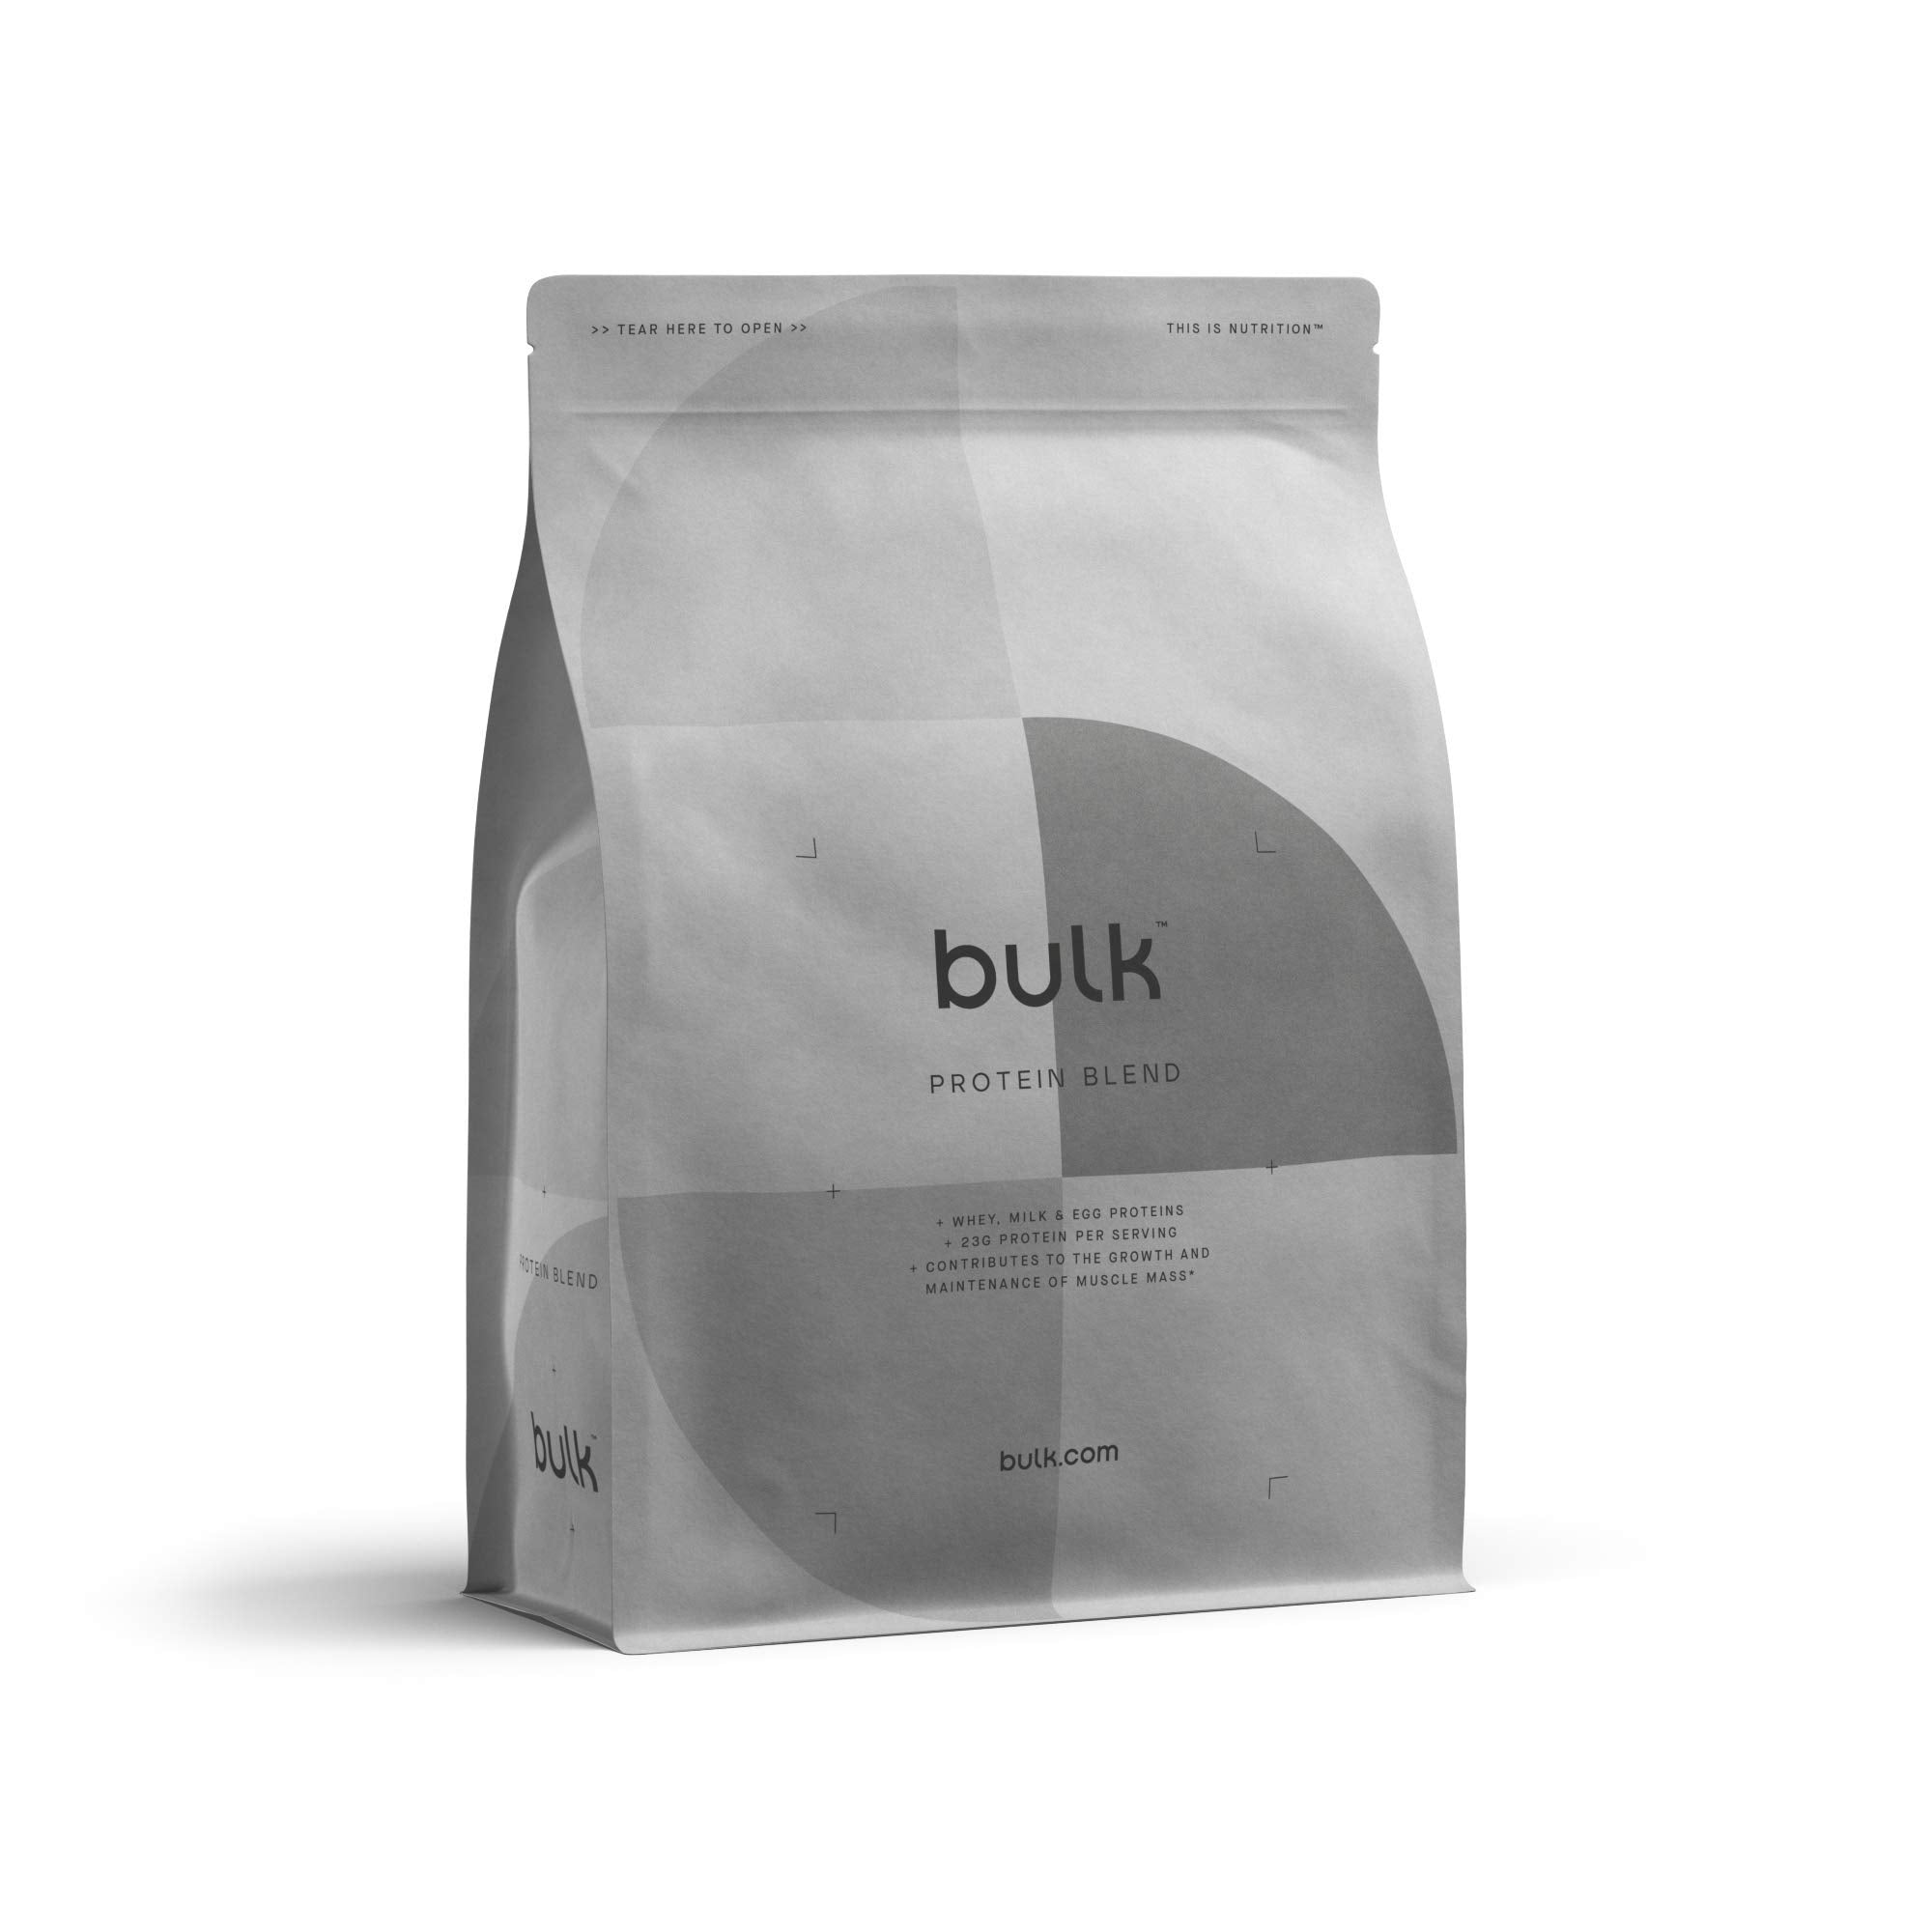 Bulk Complete Protein Blend, Whey, Milk and Egg Protein Shake, Strawberry, 2.5 kg, Packaging May Vary